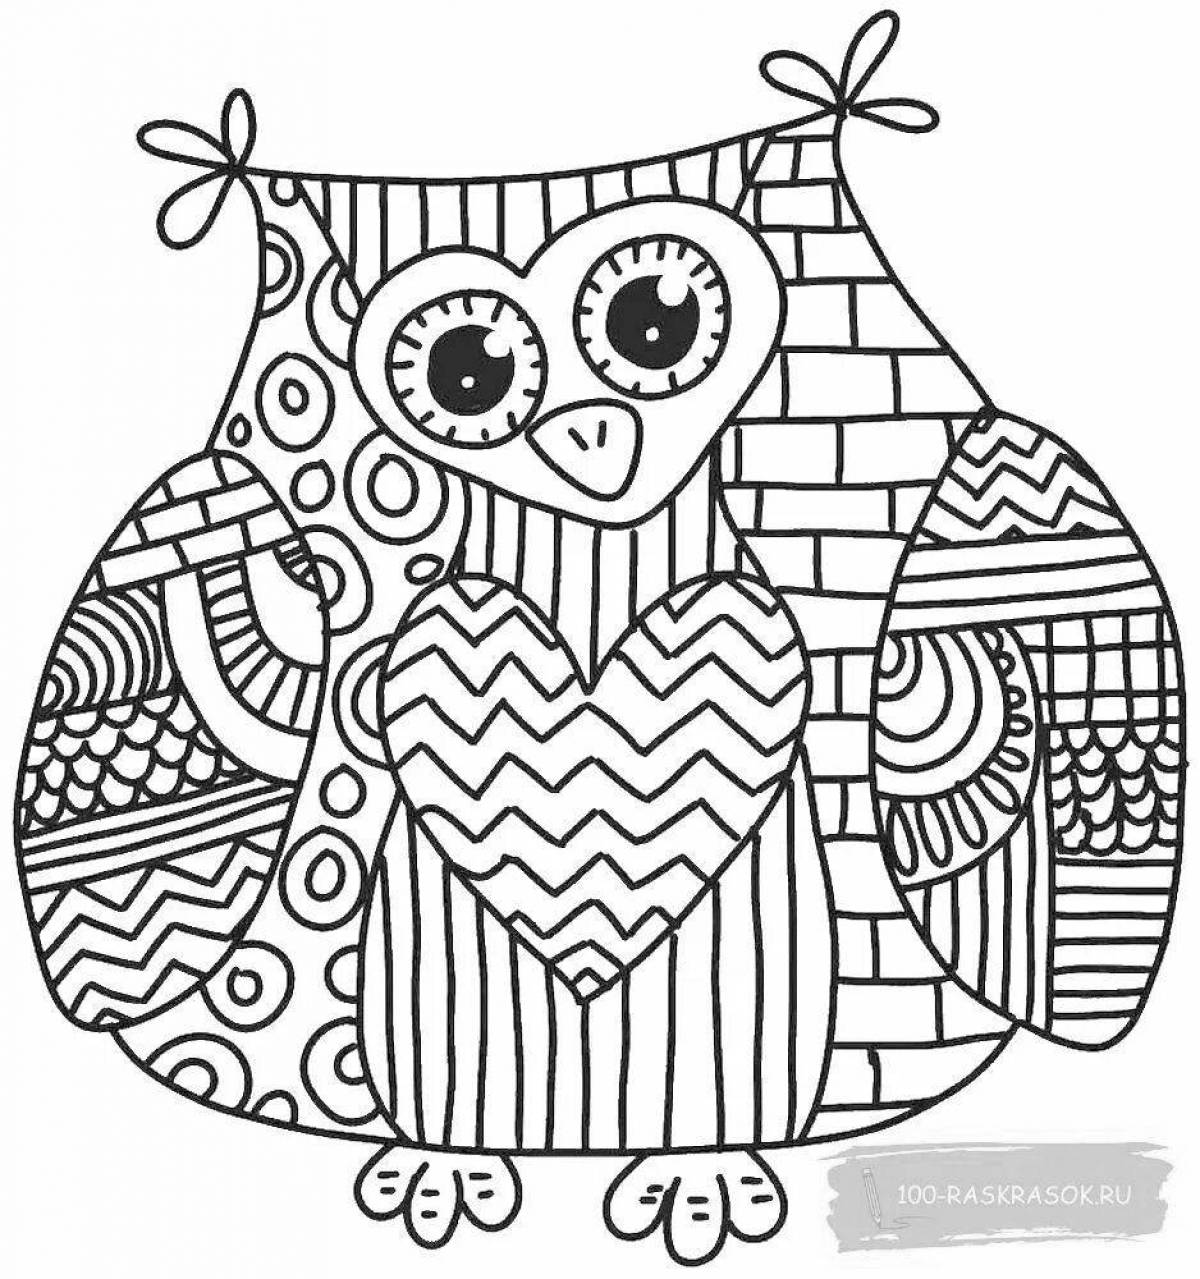 Relaxing anti-stress coloring book for 8 year olds